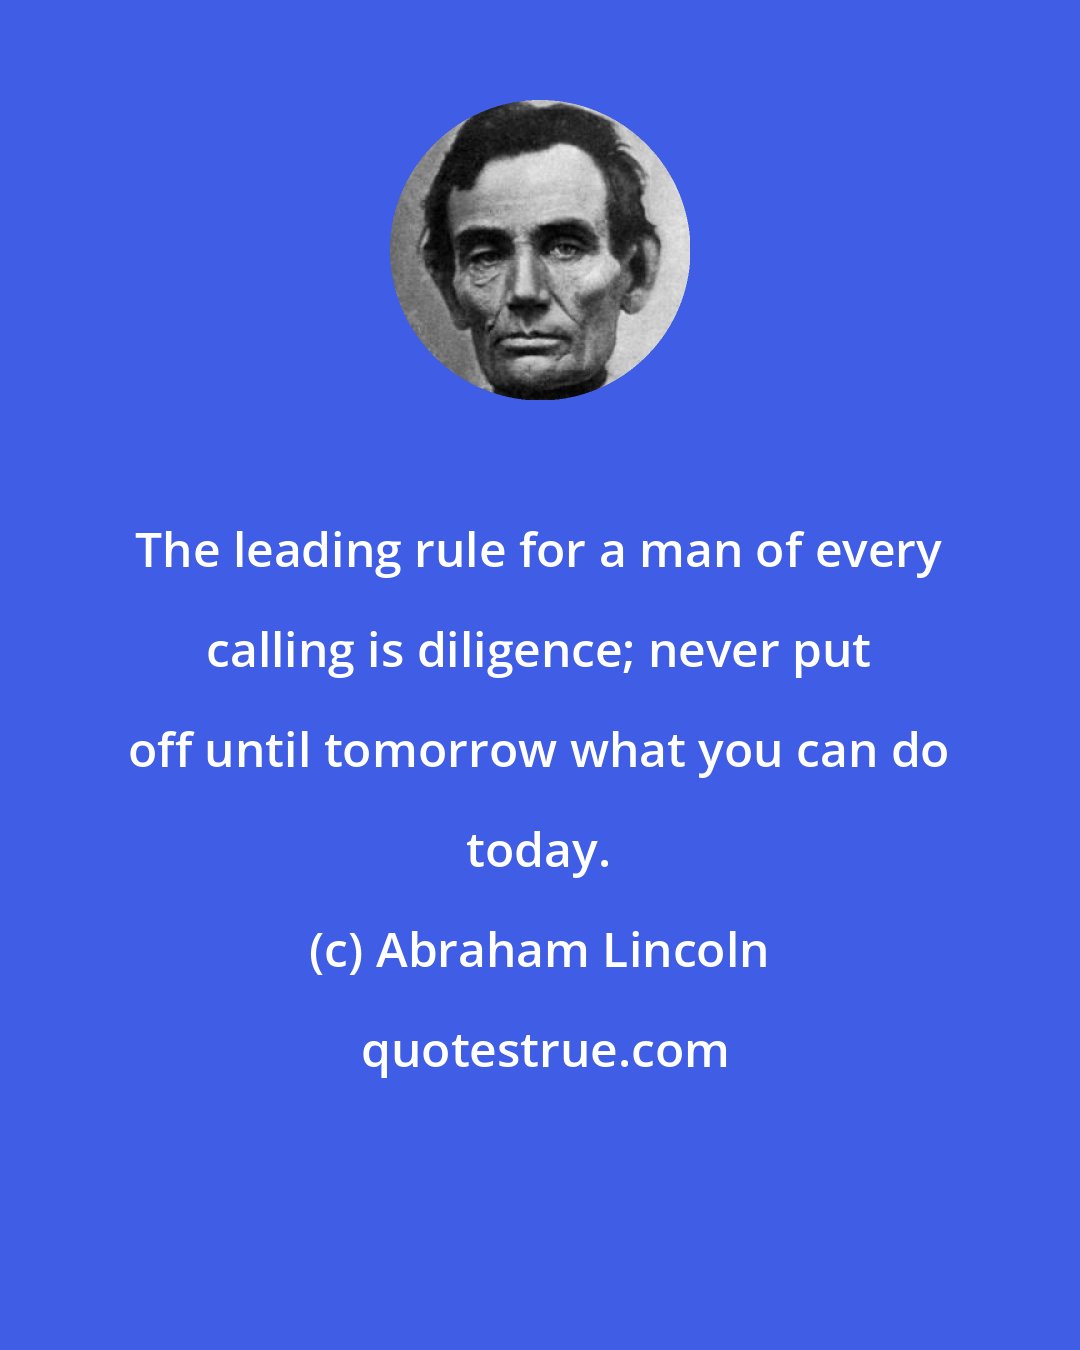 Abraham Lincoln: The leading rule for a man of every calling is diligence; never put off until tomorrow what you can do today.